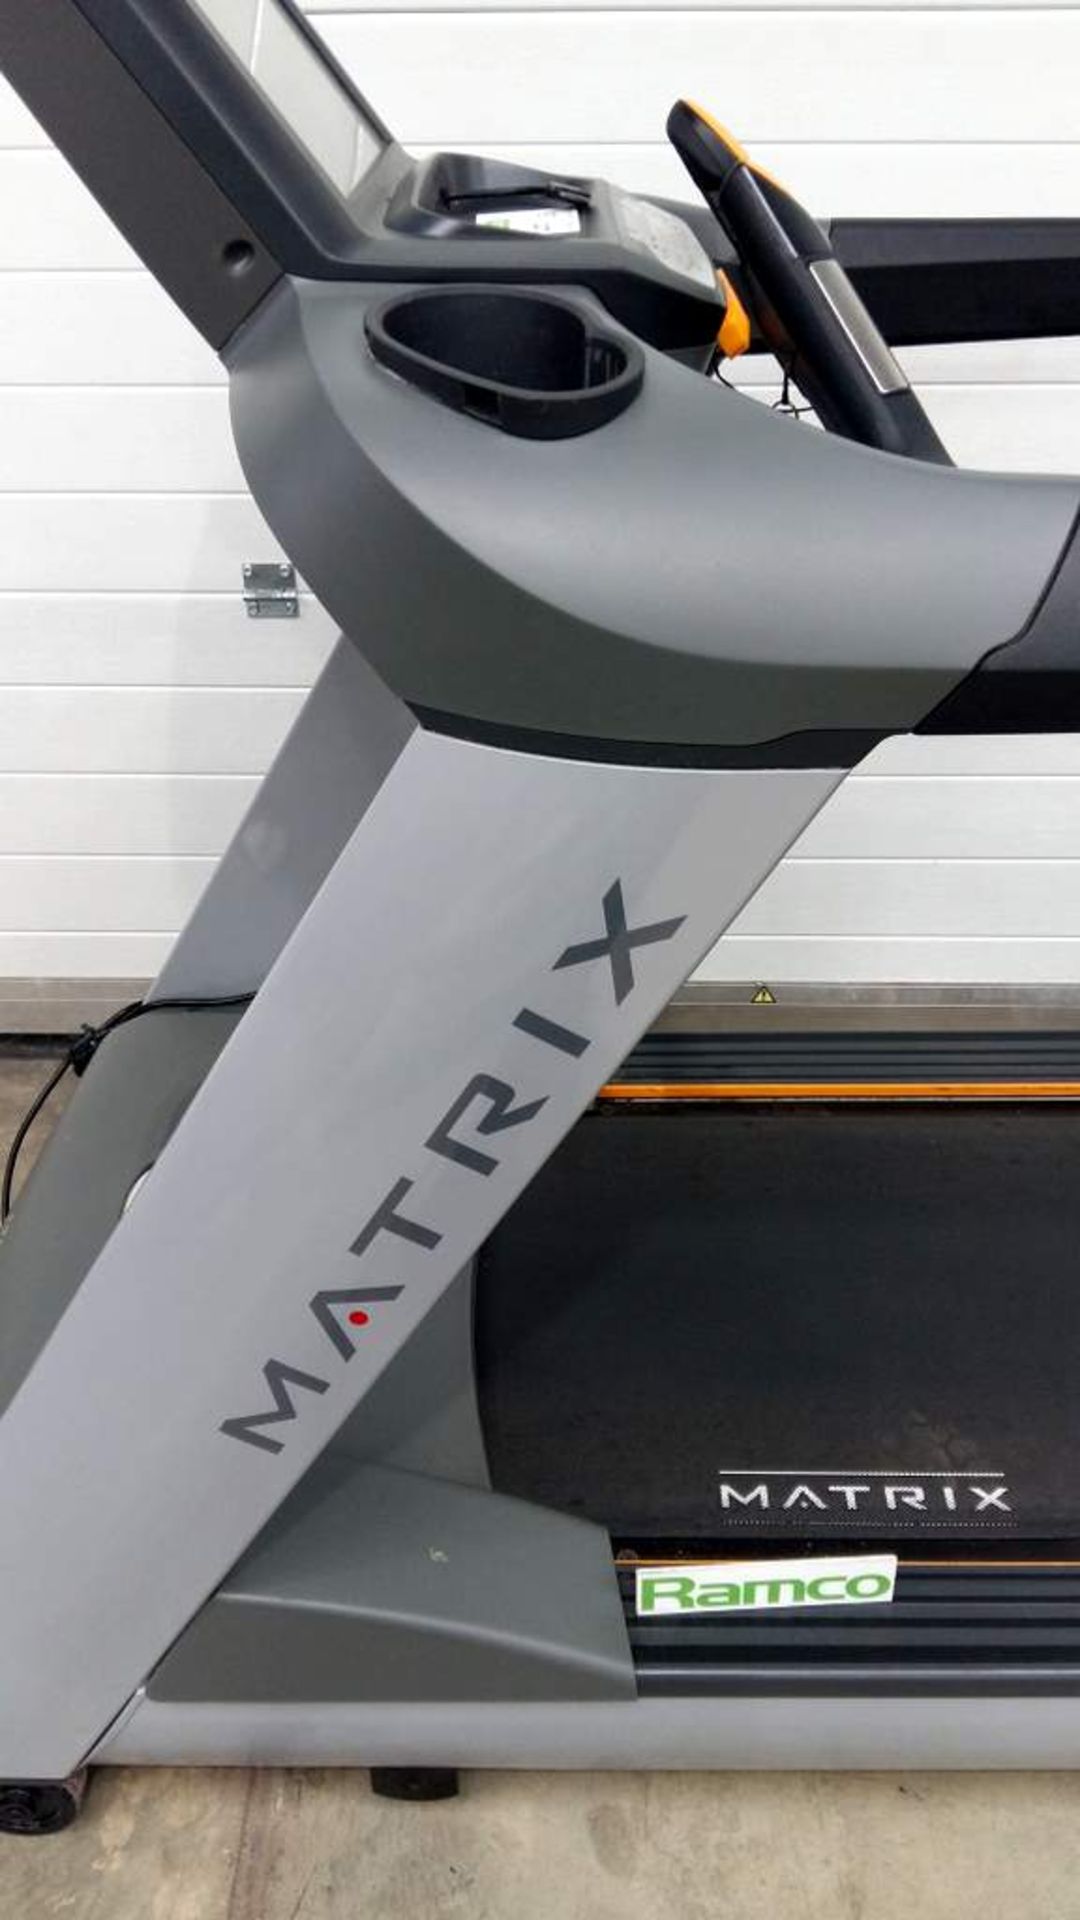 Matrix treadmill with active console Model: T7xe - Max user weight 182kg - 240v - Image 14 of 18